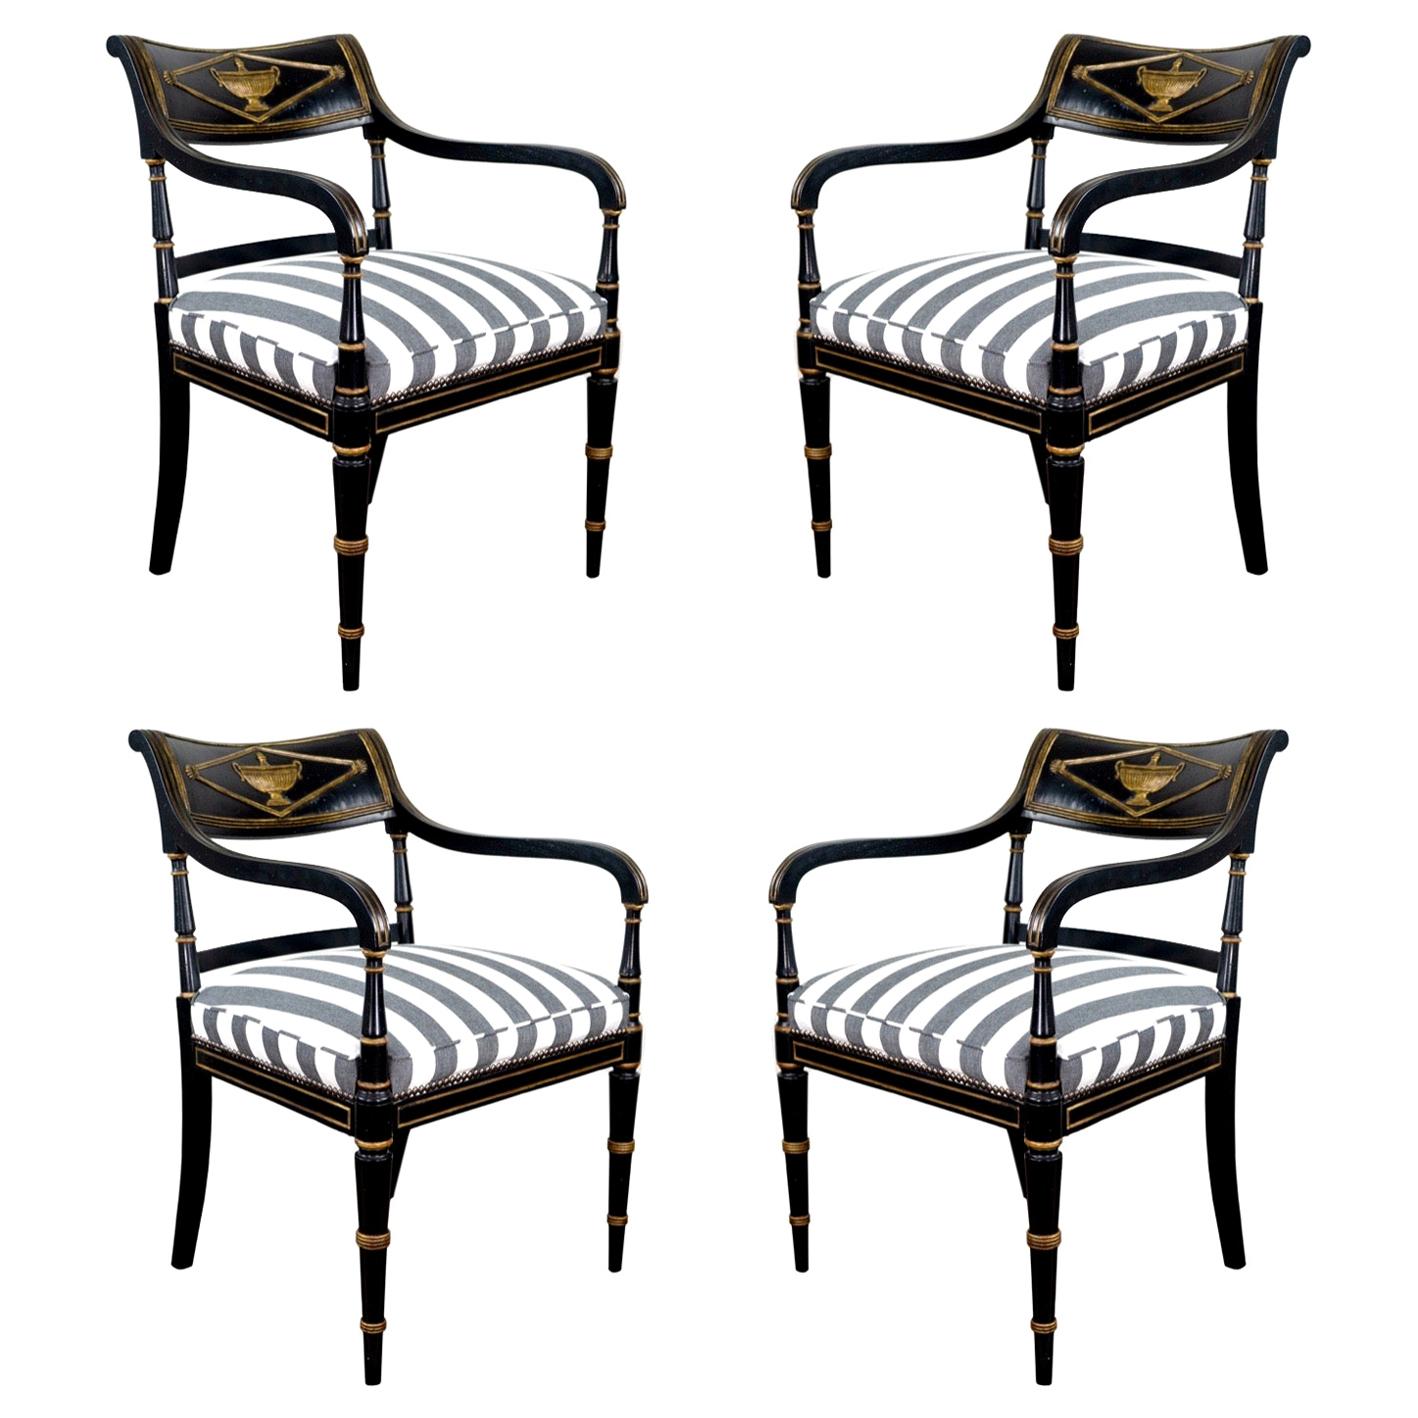 Empire Period Black Chairs with Gilding